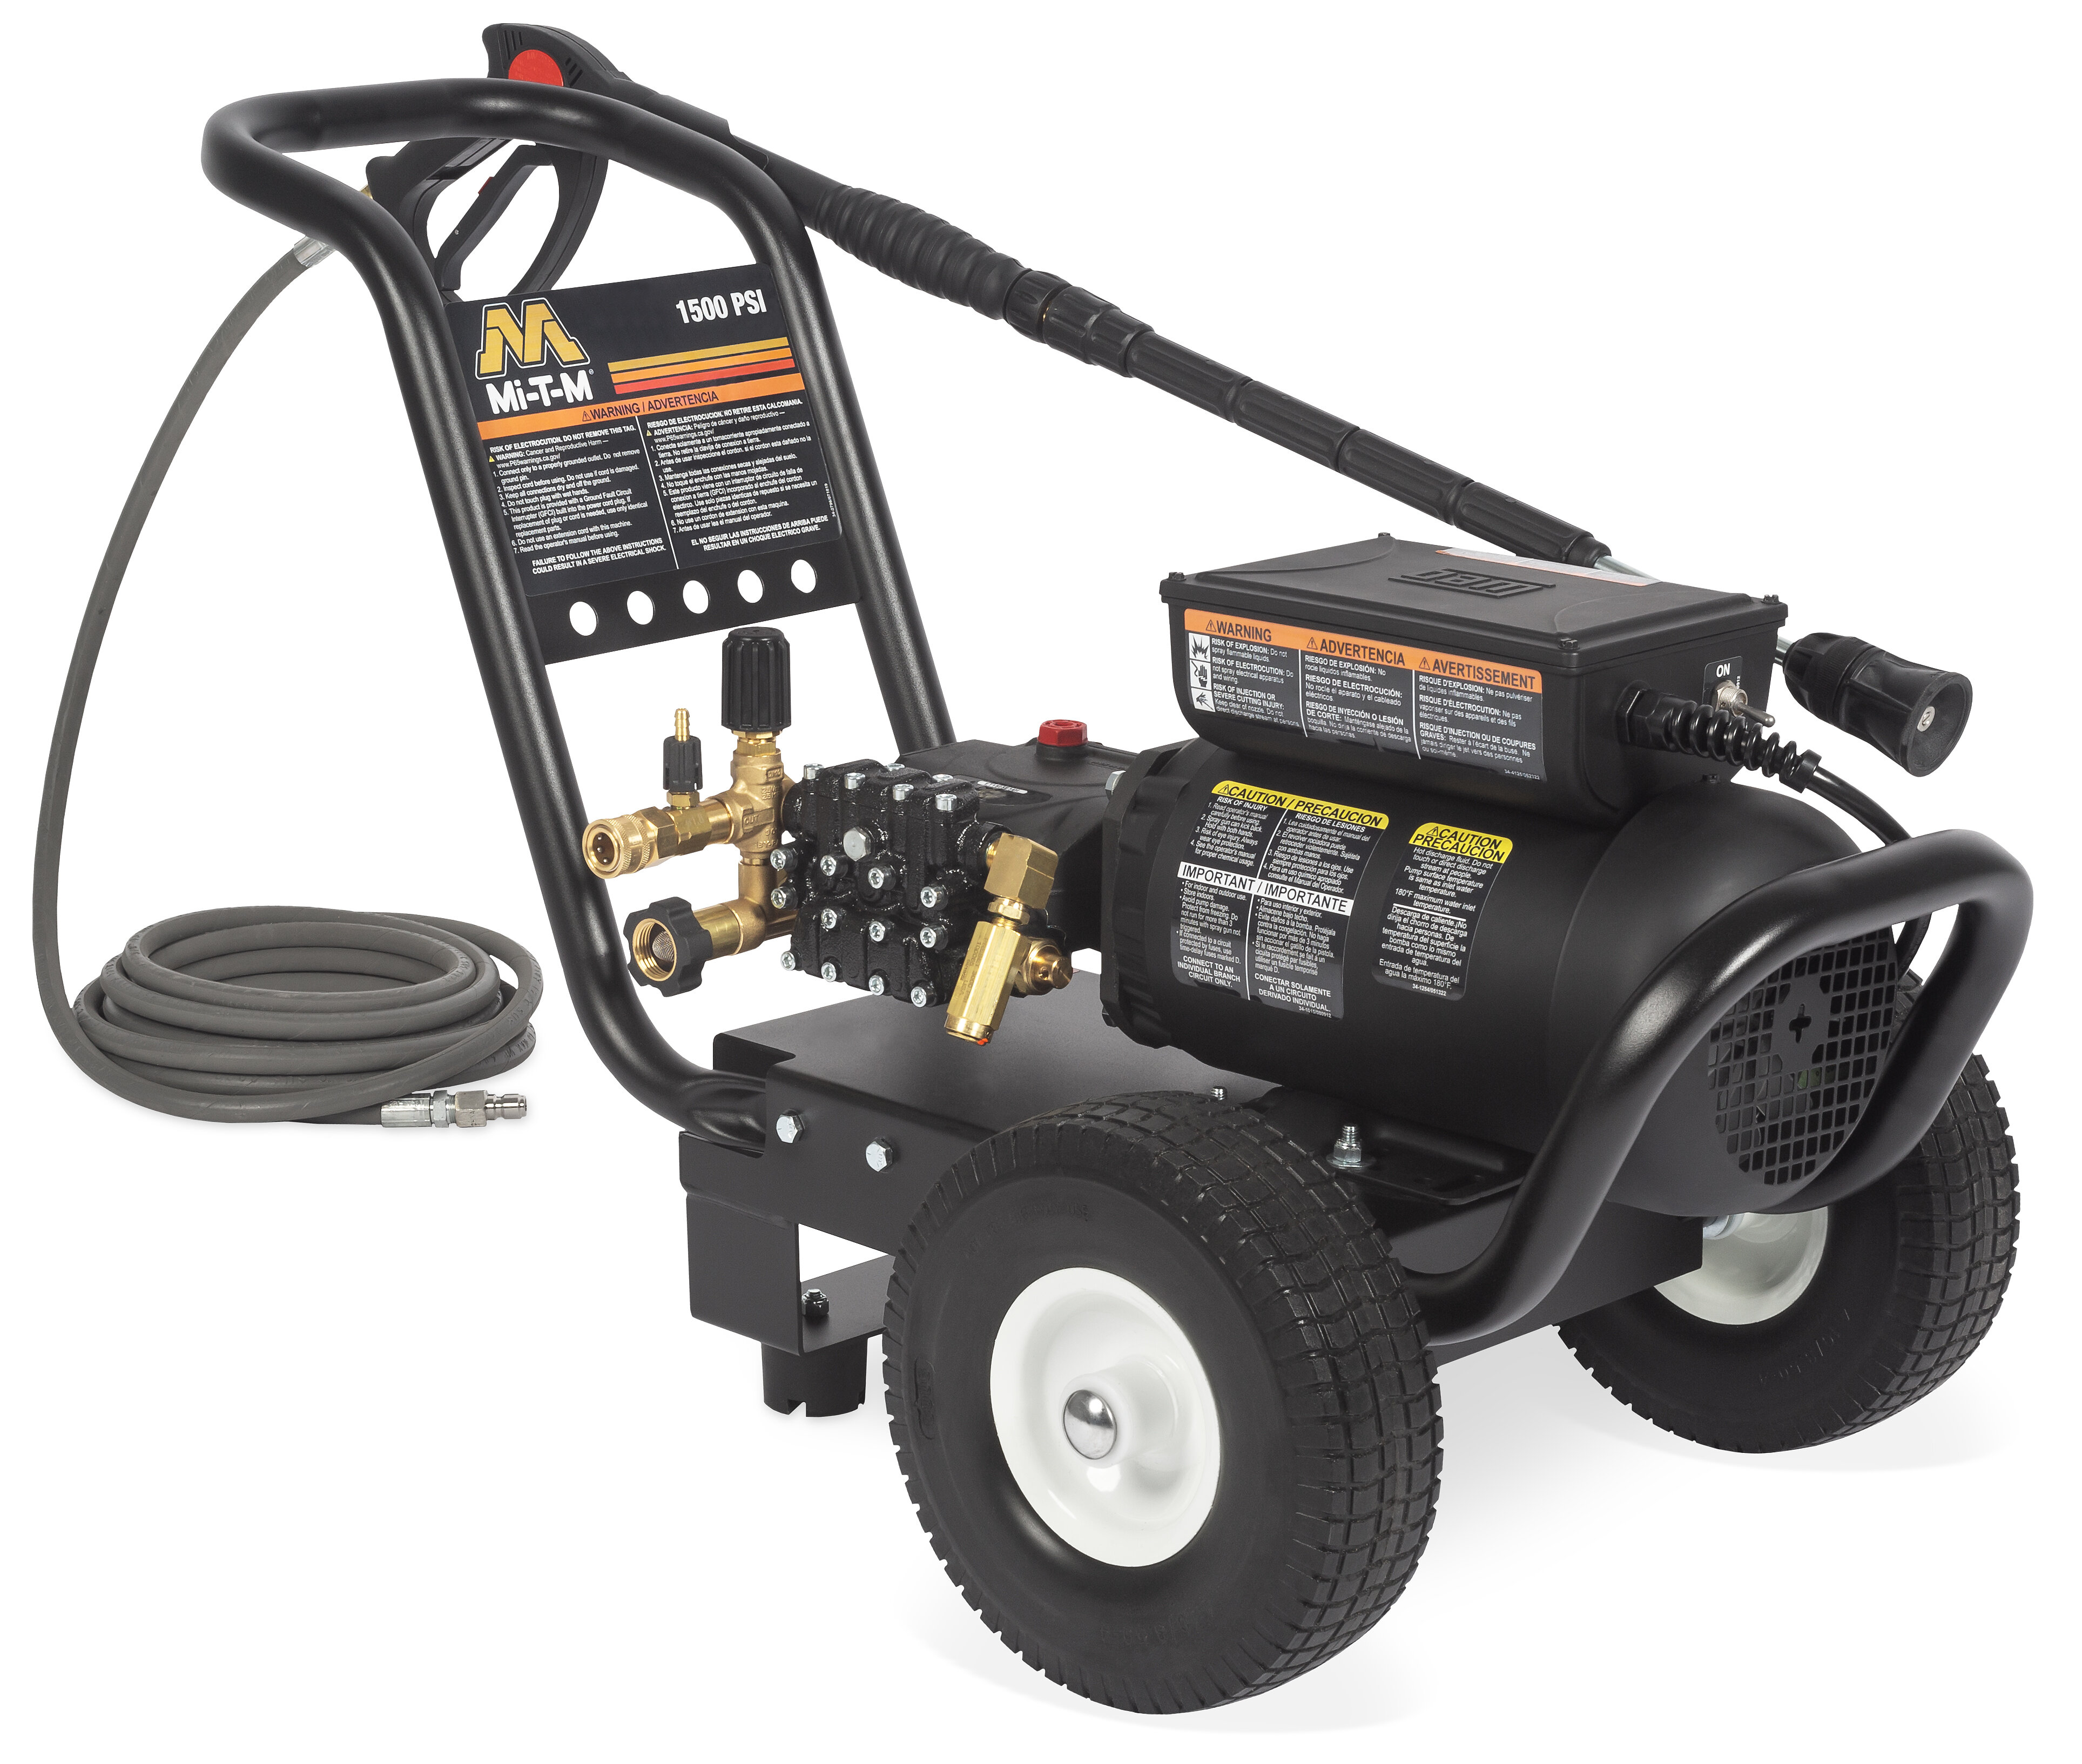 best electric pressure washers